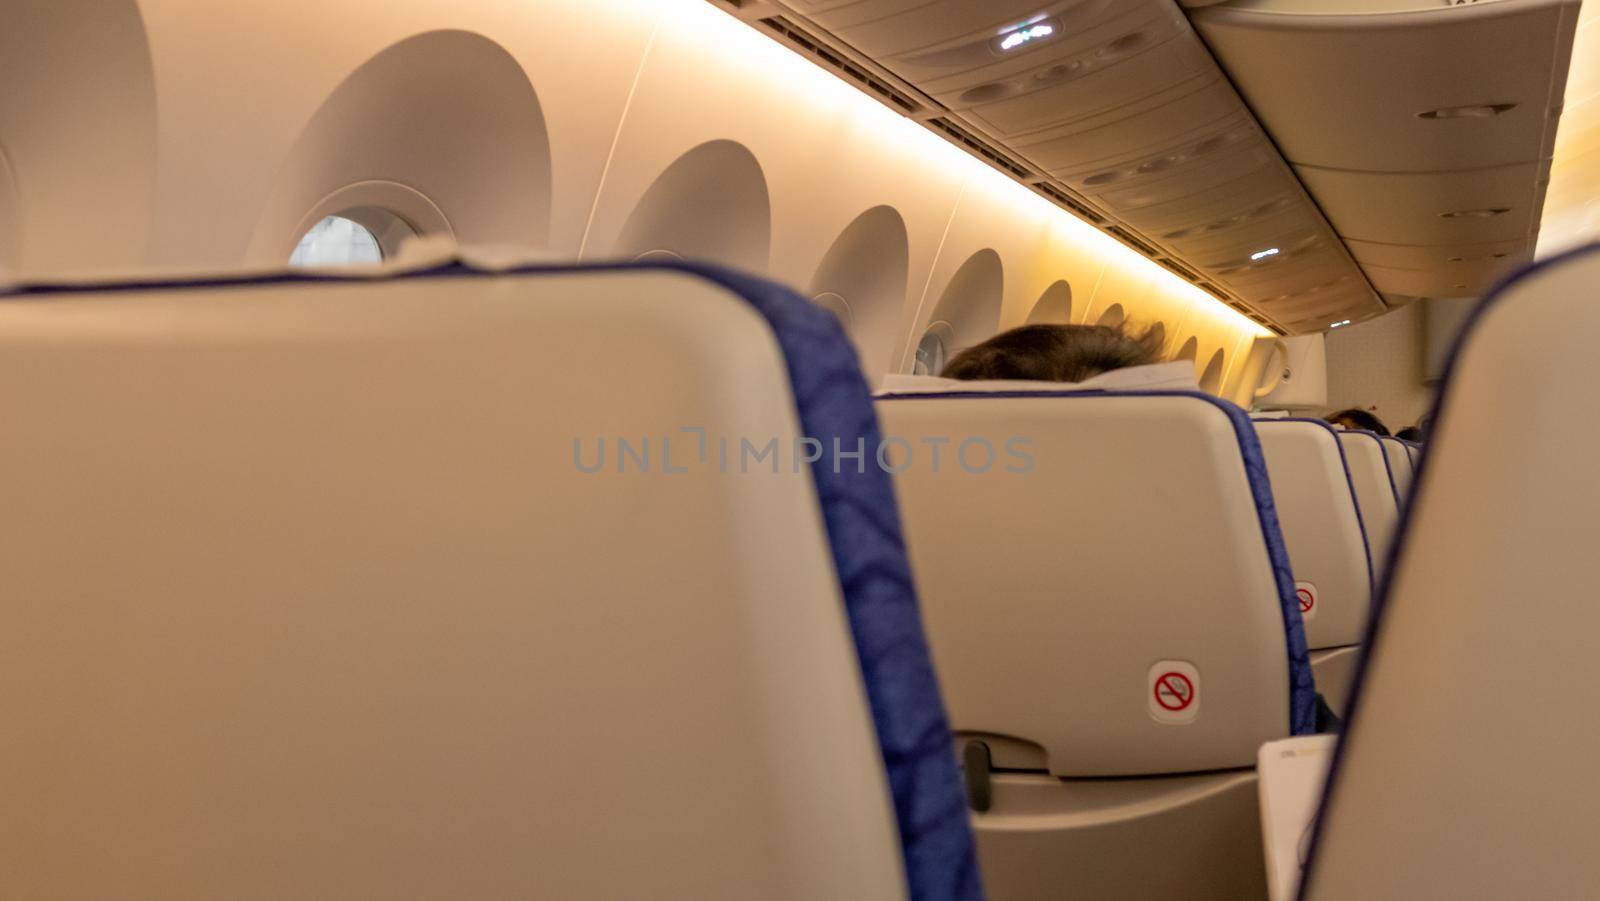 Interior of airplane cabin by imagesbykenny